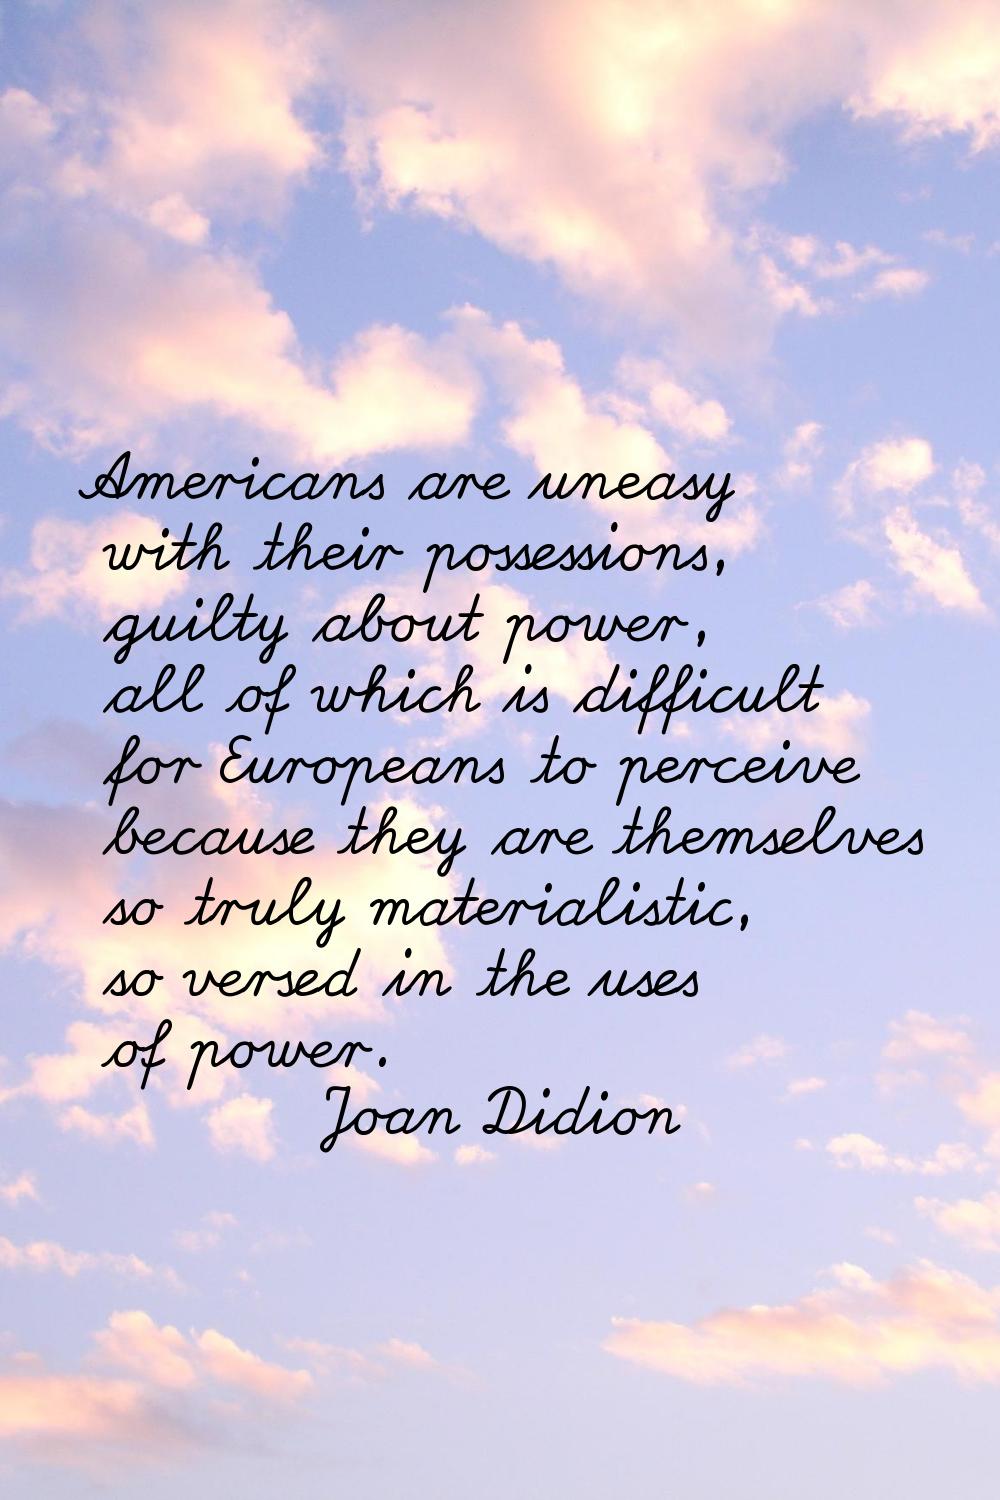 Americans are uneasy with their possessions, guilty about power, all of which is difficult for Euro